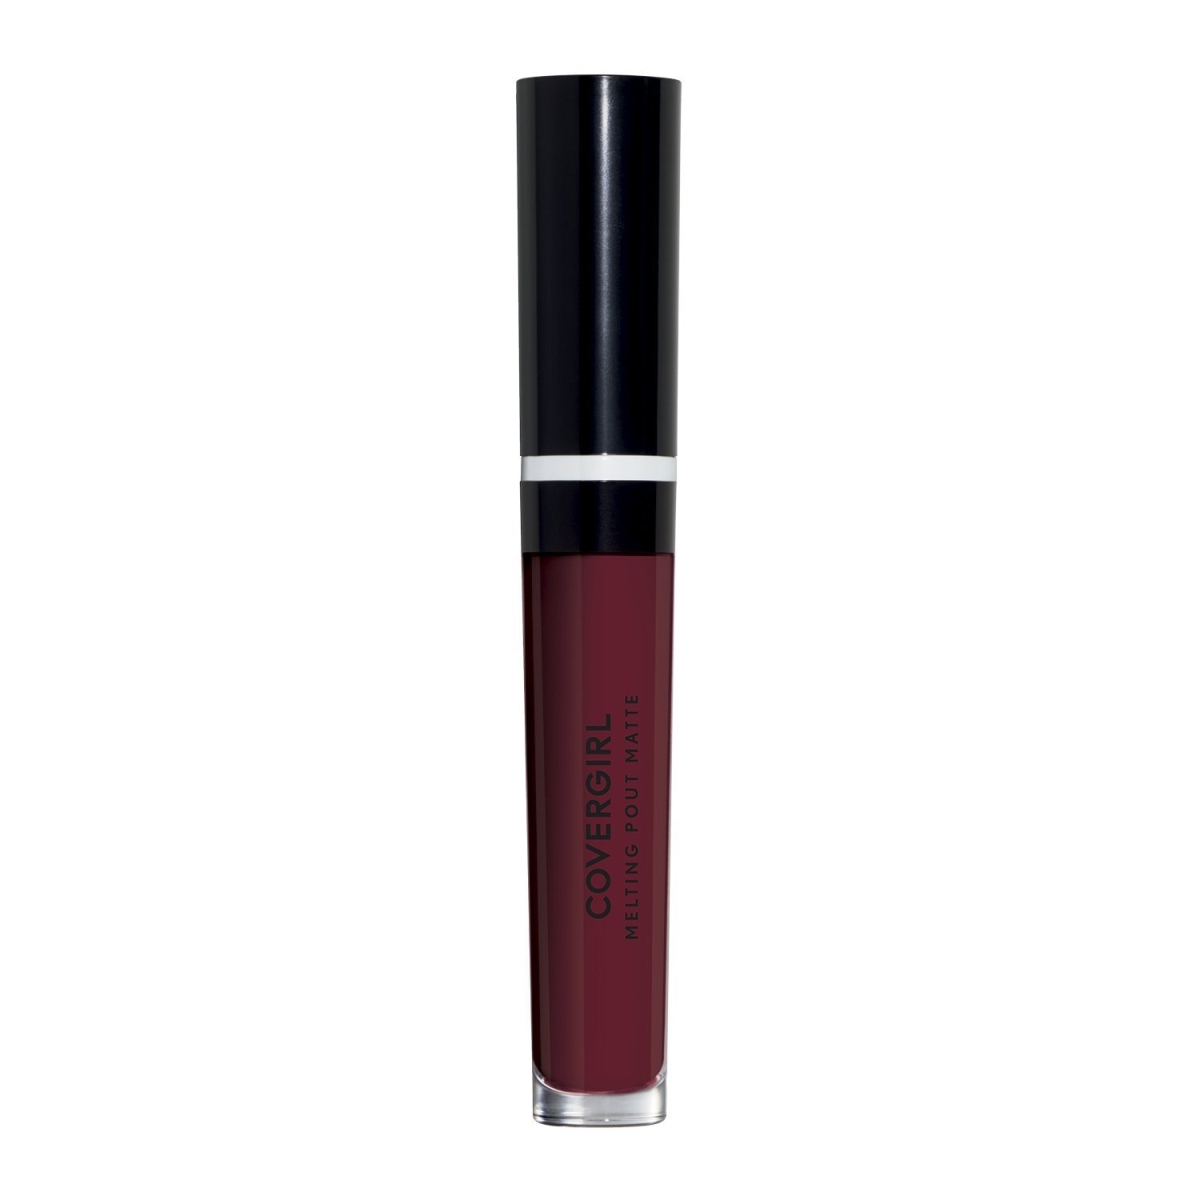 8291284 Covergirl Melting Pout Matte Liquid Lipstick, 315 All Nighters - Pack Of 2